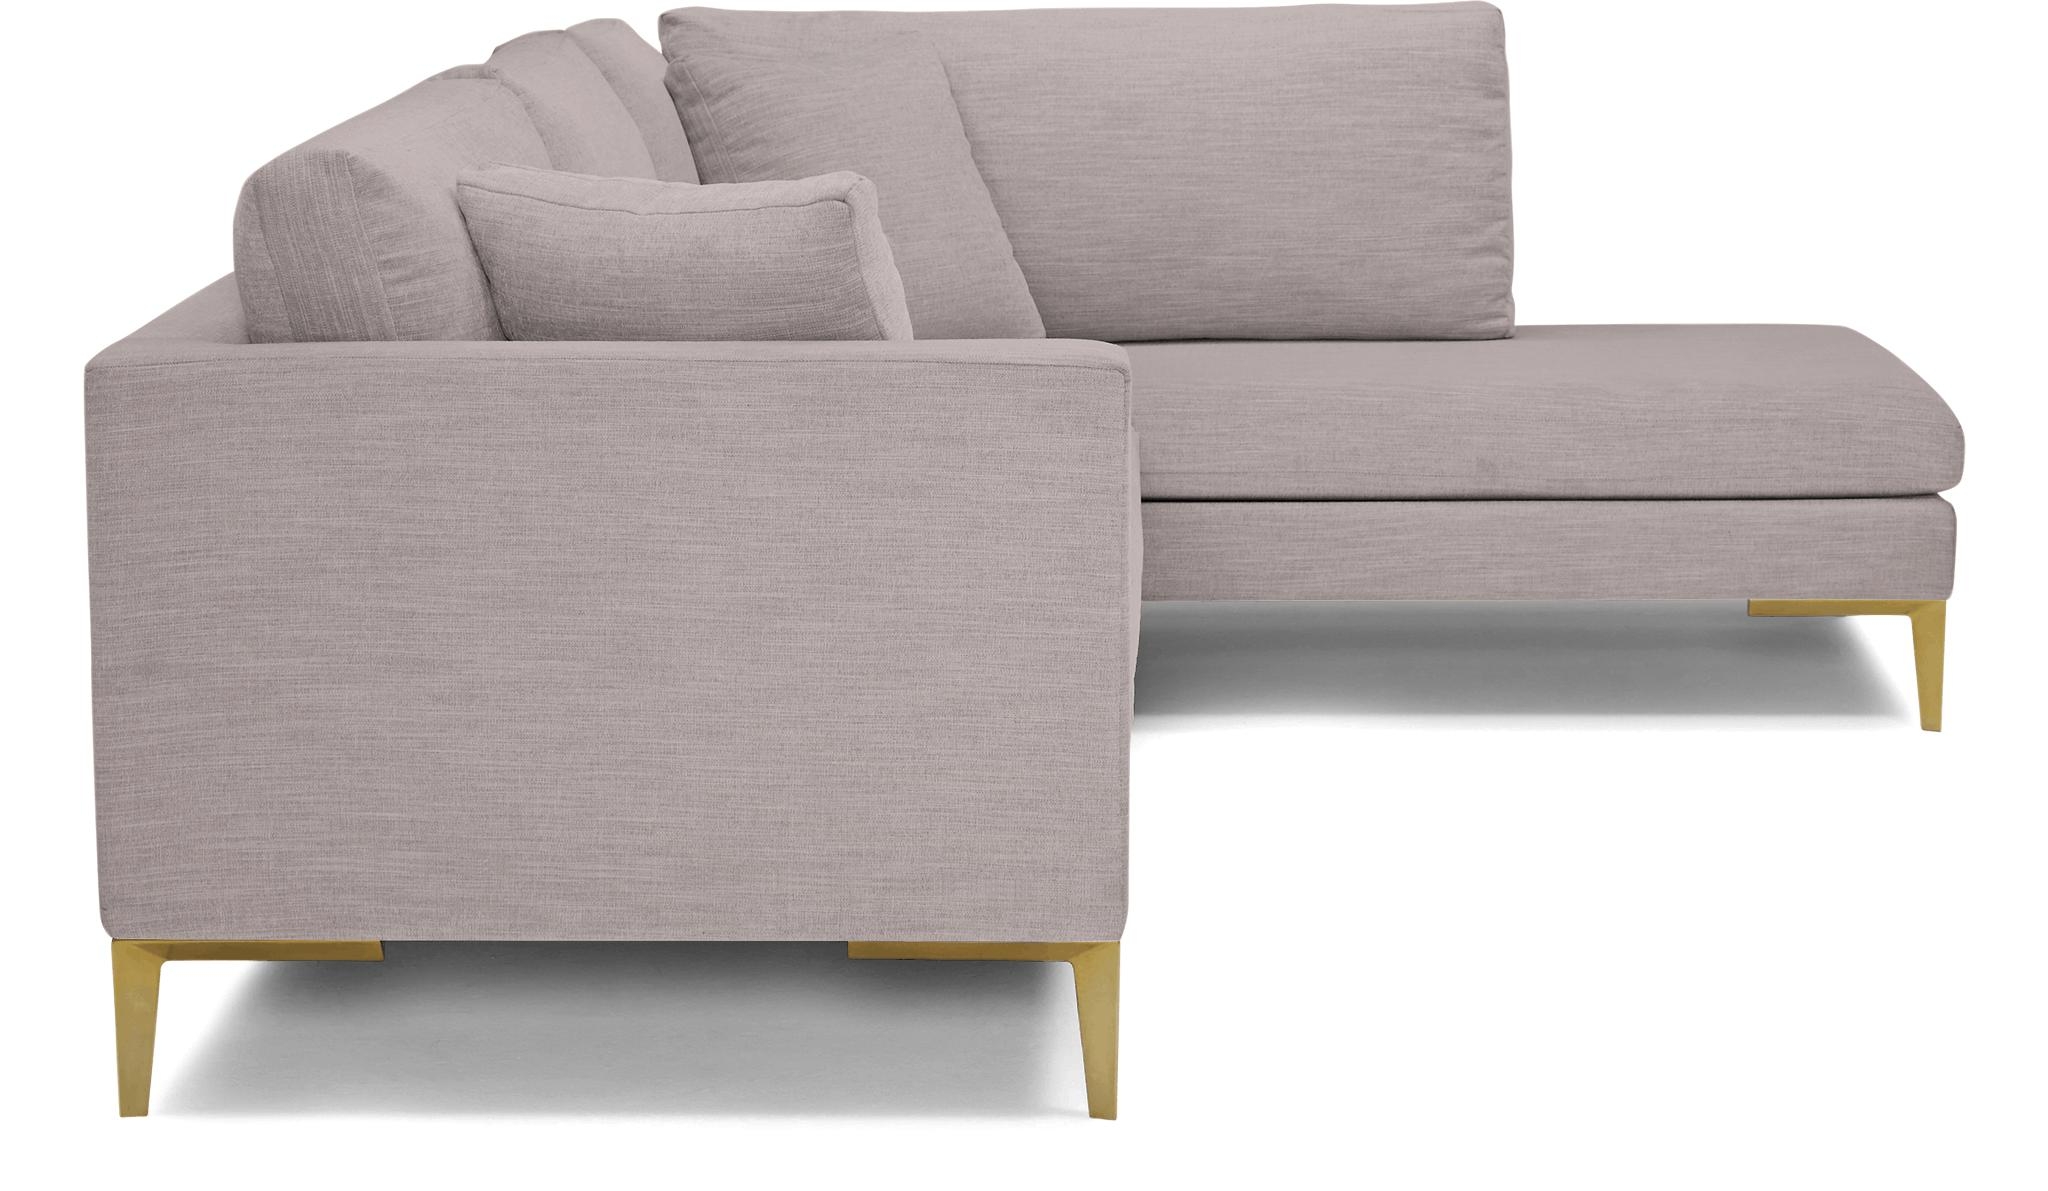 Purple Ainsley Mid Century Modern Sectional with Bumper - Sunbrella Premier Wisteria - Right  - Image 2